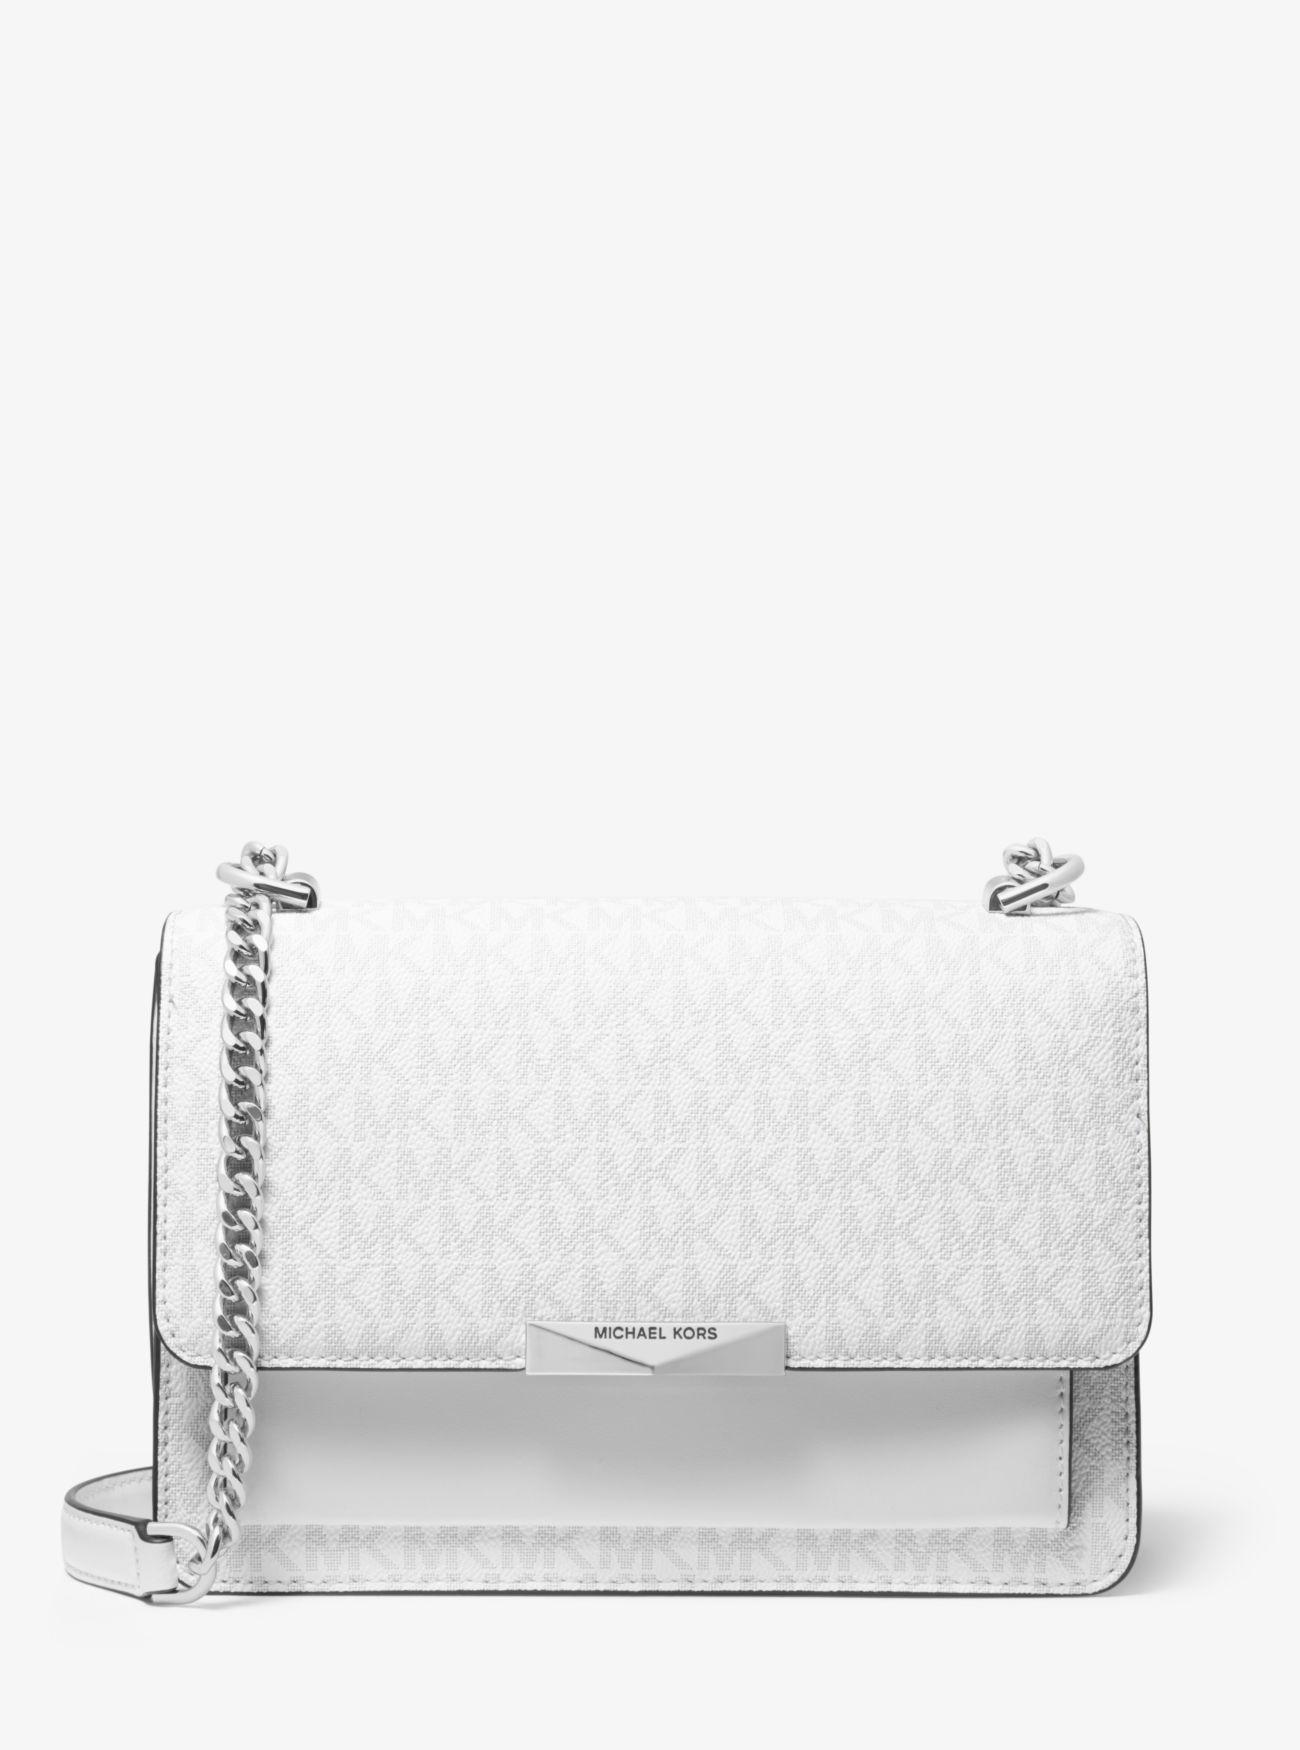 MICHAEL Michael Kors Jade Large Logo And Leather Crossbody Bag in White - Lyst